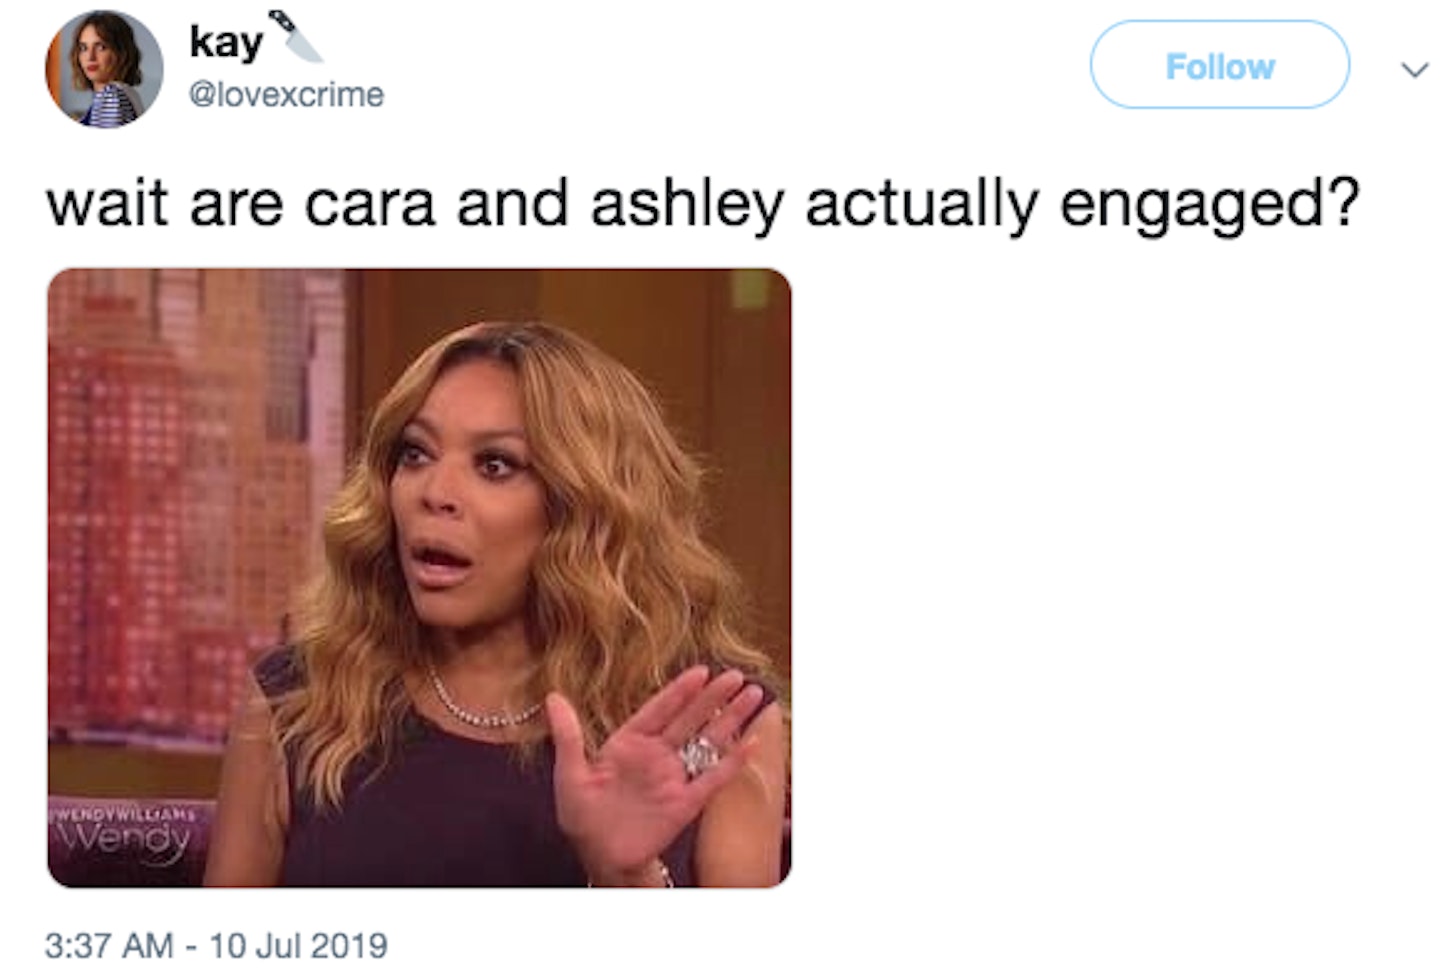 The Best Reactions To Ashley Benson And Cara Delevingne's Engagement